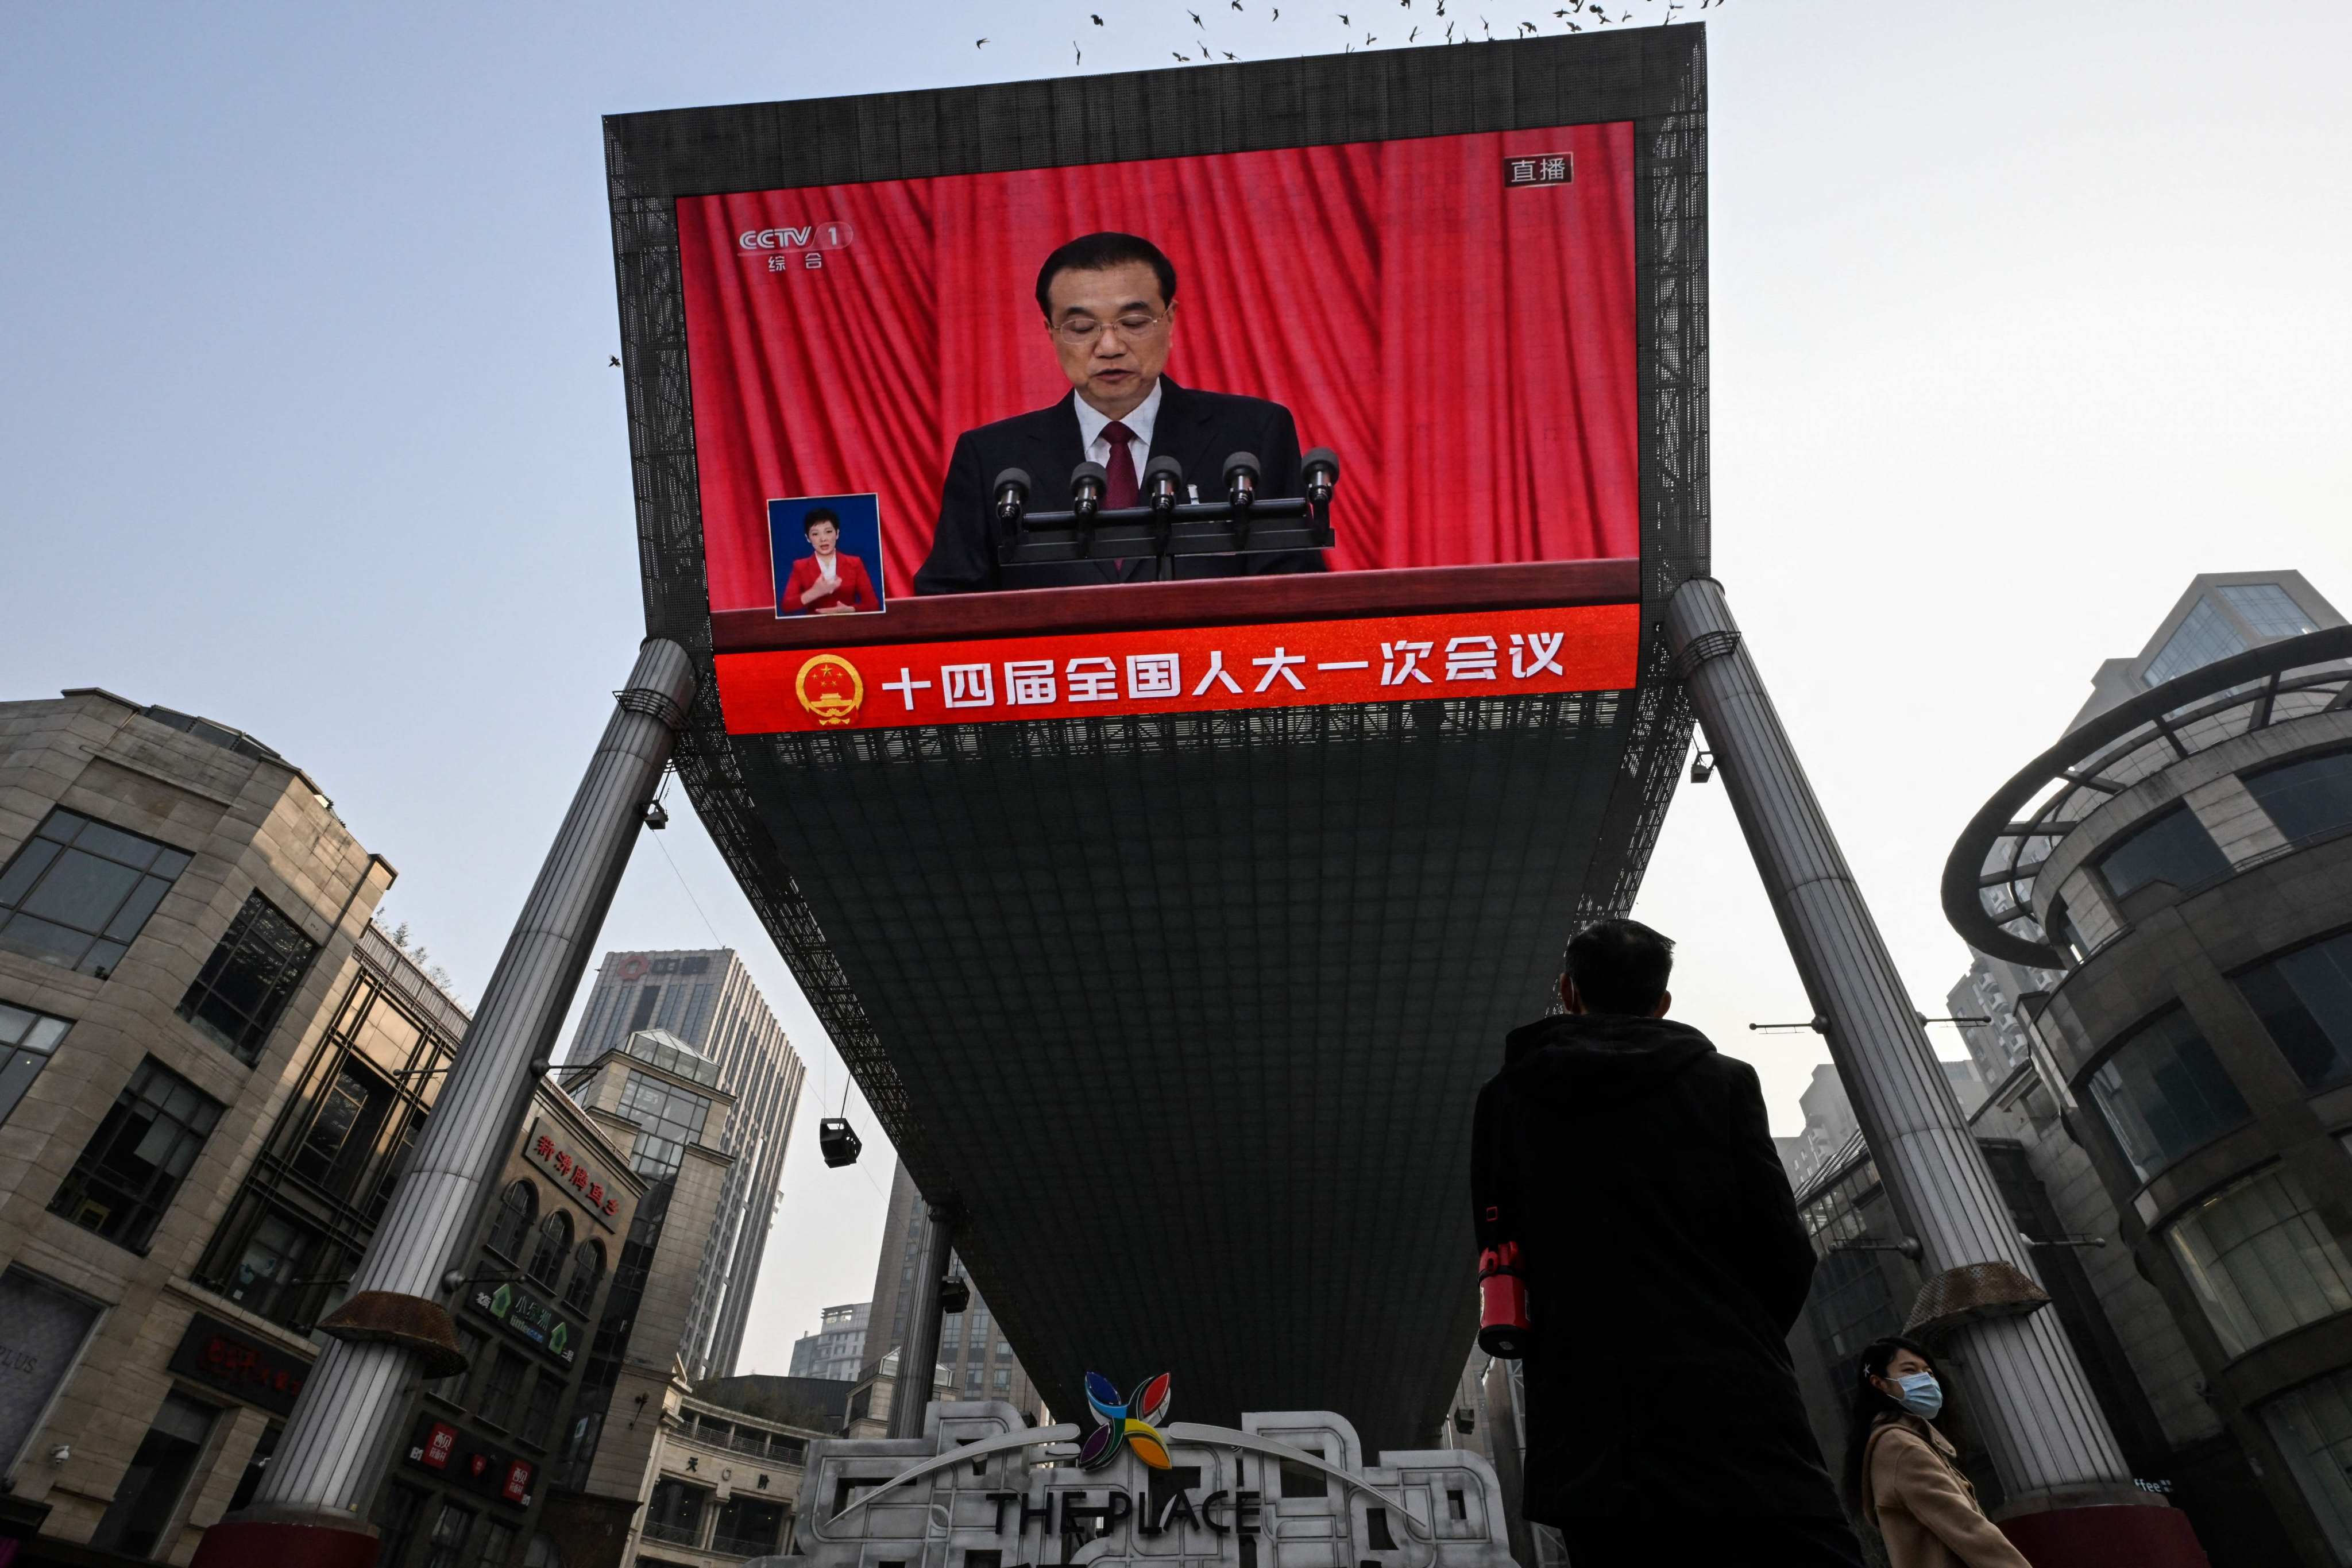 A large outdoor screen in Beijing shows Premier Li Keqiang delivering a work report during the opening session of the National People’s Congress on Sunday. Photo: AFP